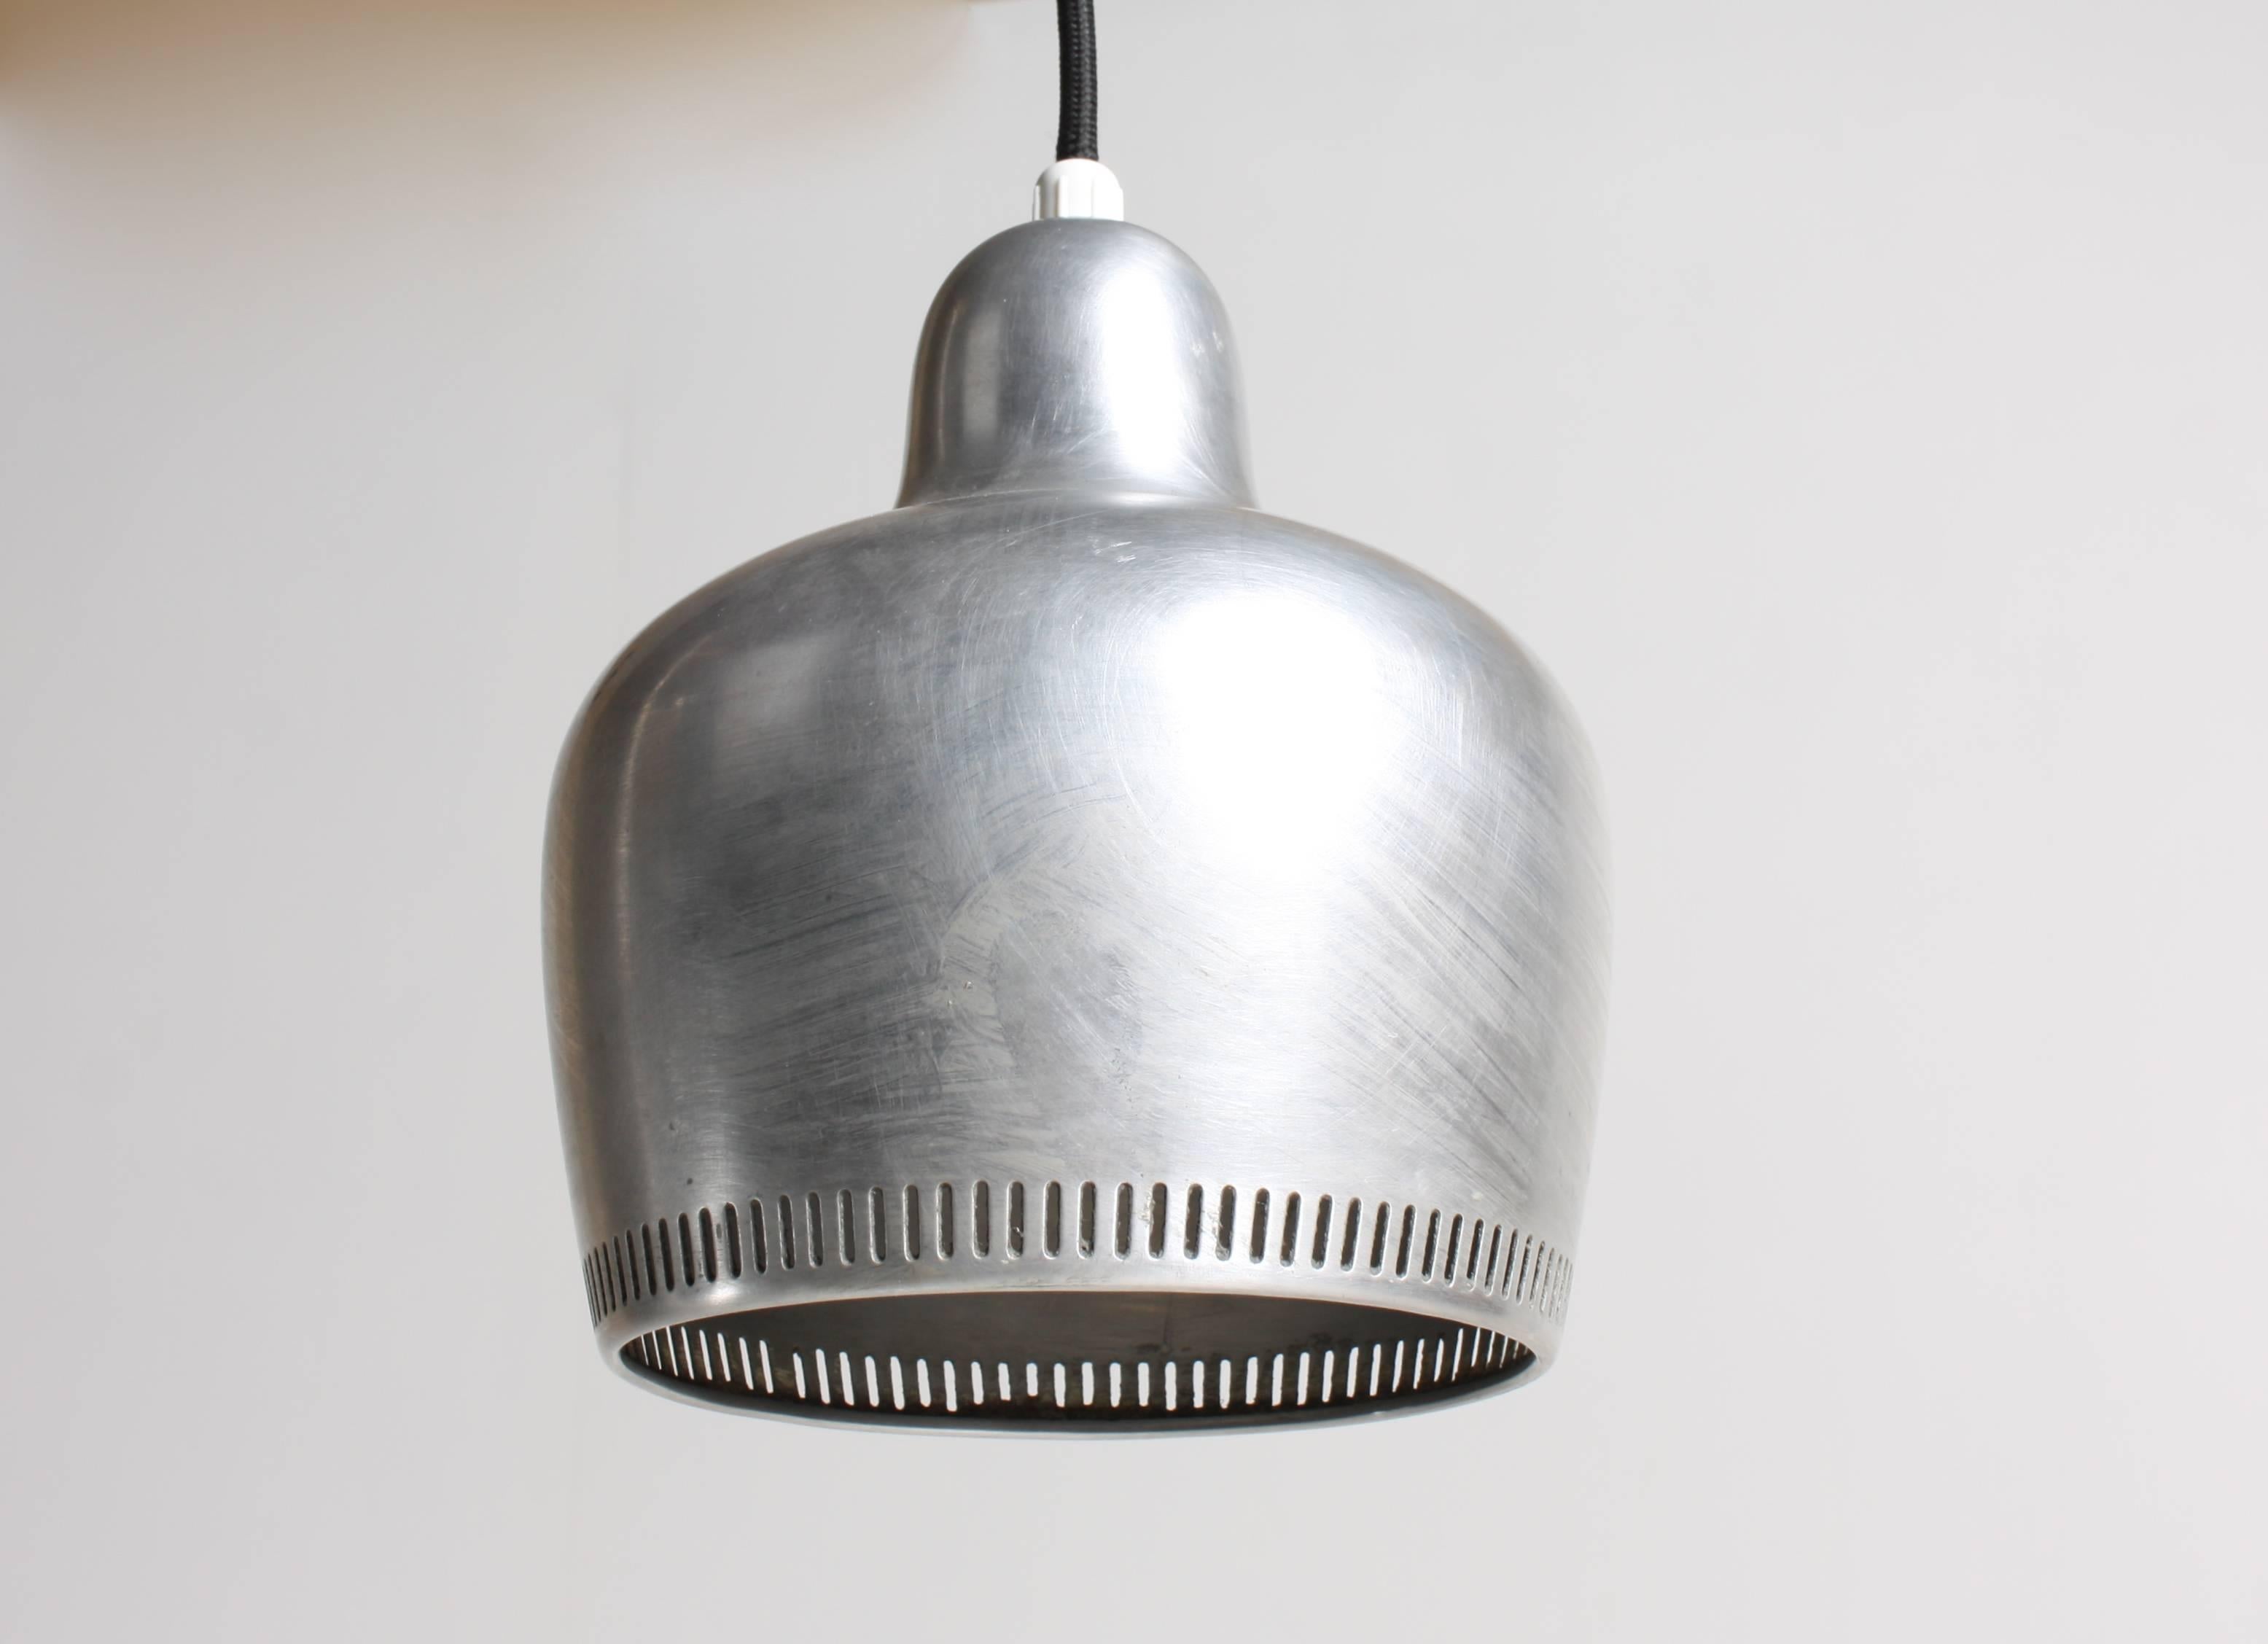 Group of four bell pendants in patinated metal designed by Alvar Aalto for Louis Poulsen in 1939. Great condition.